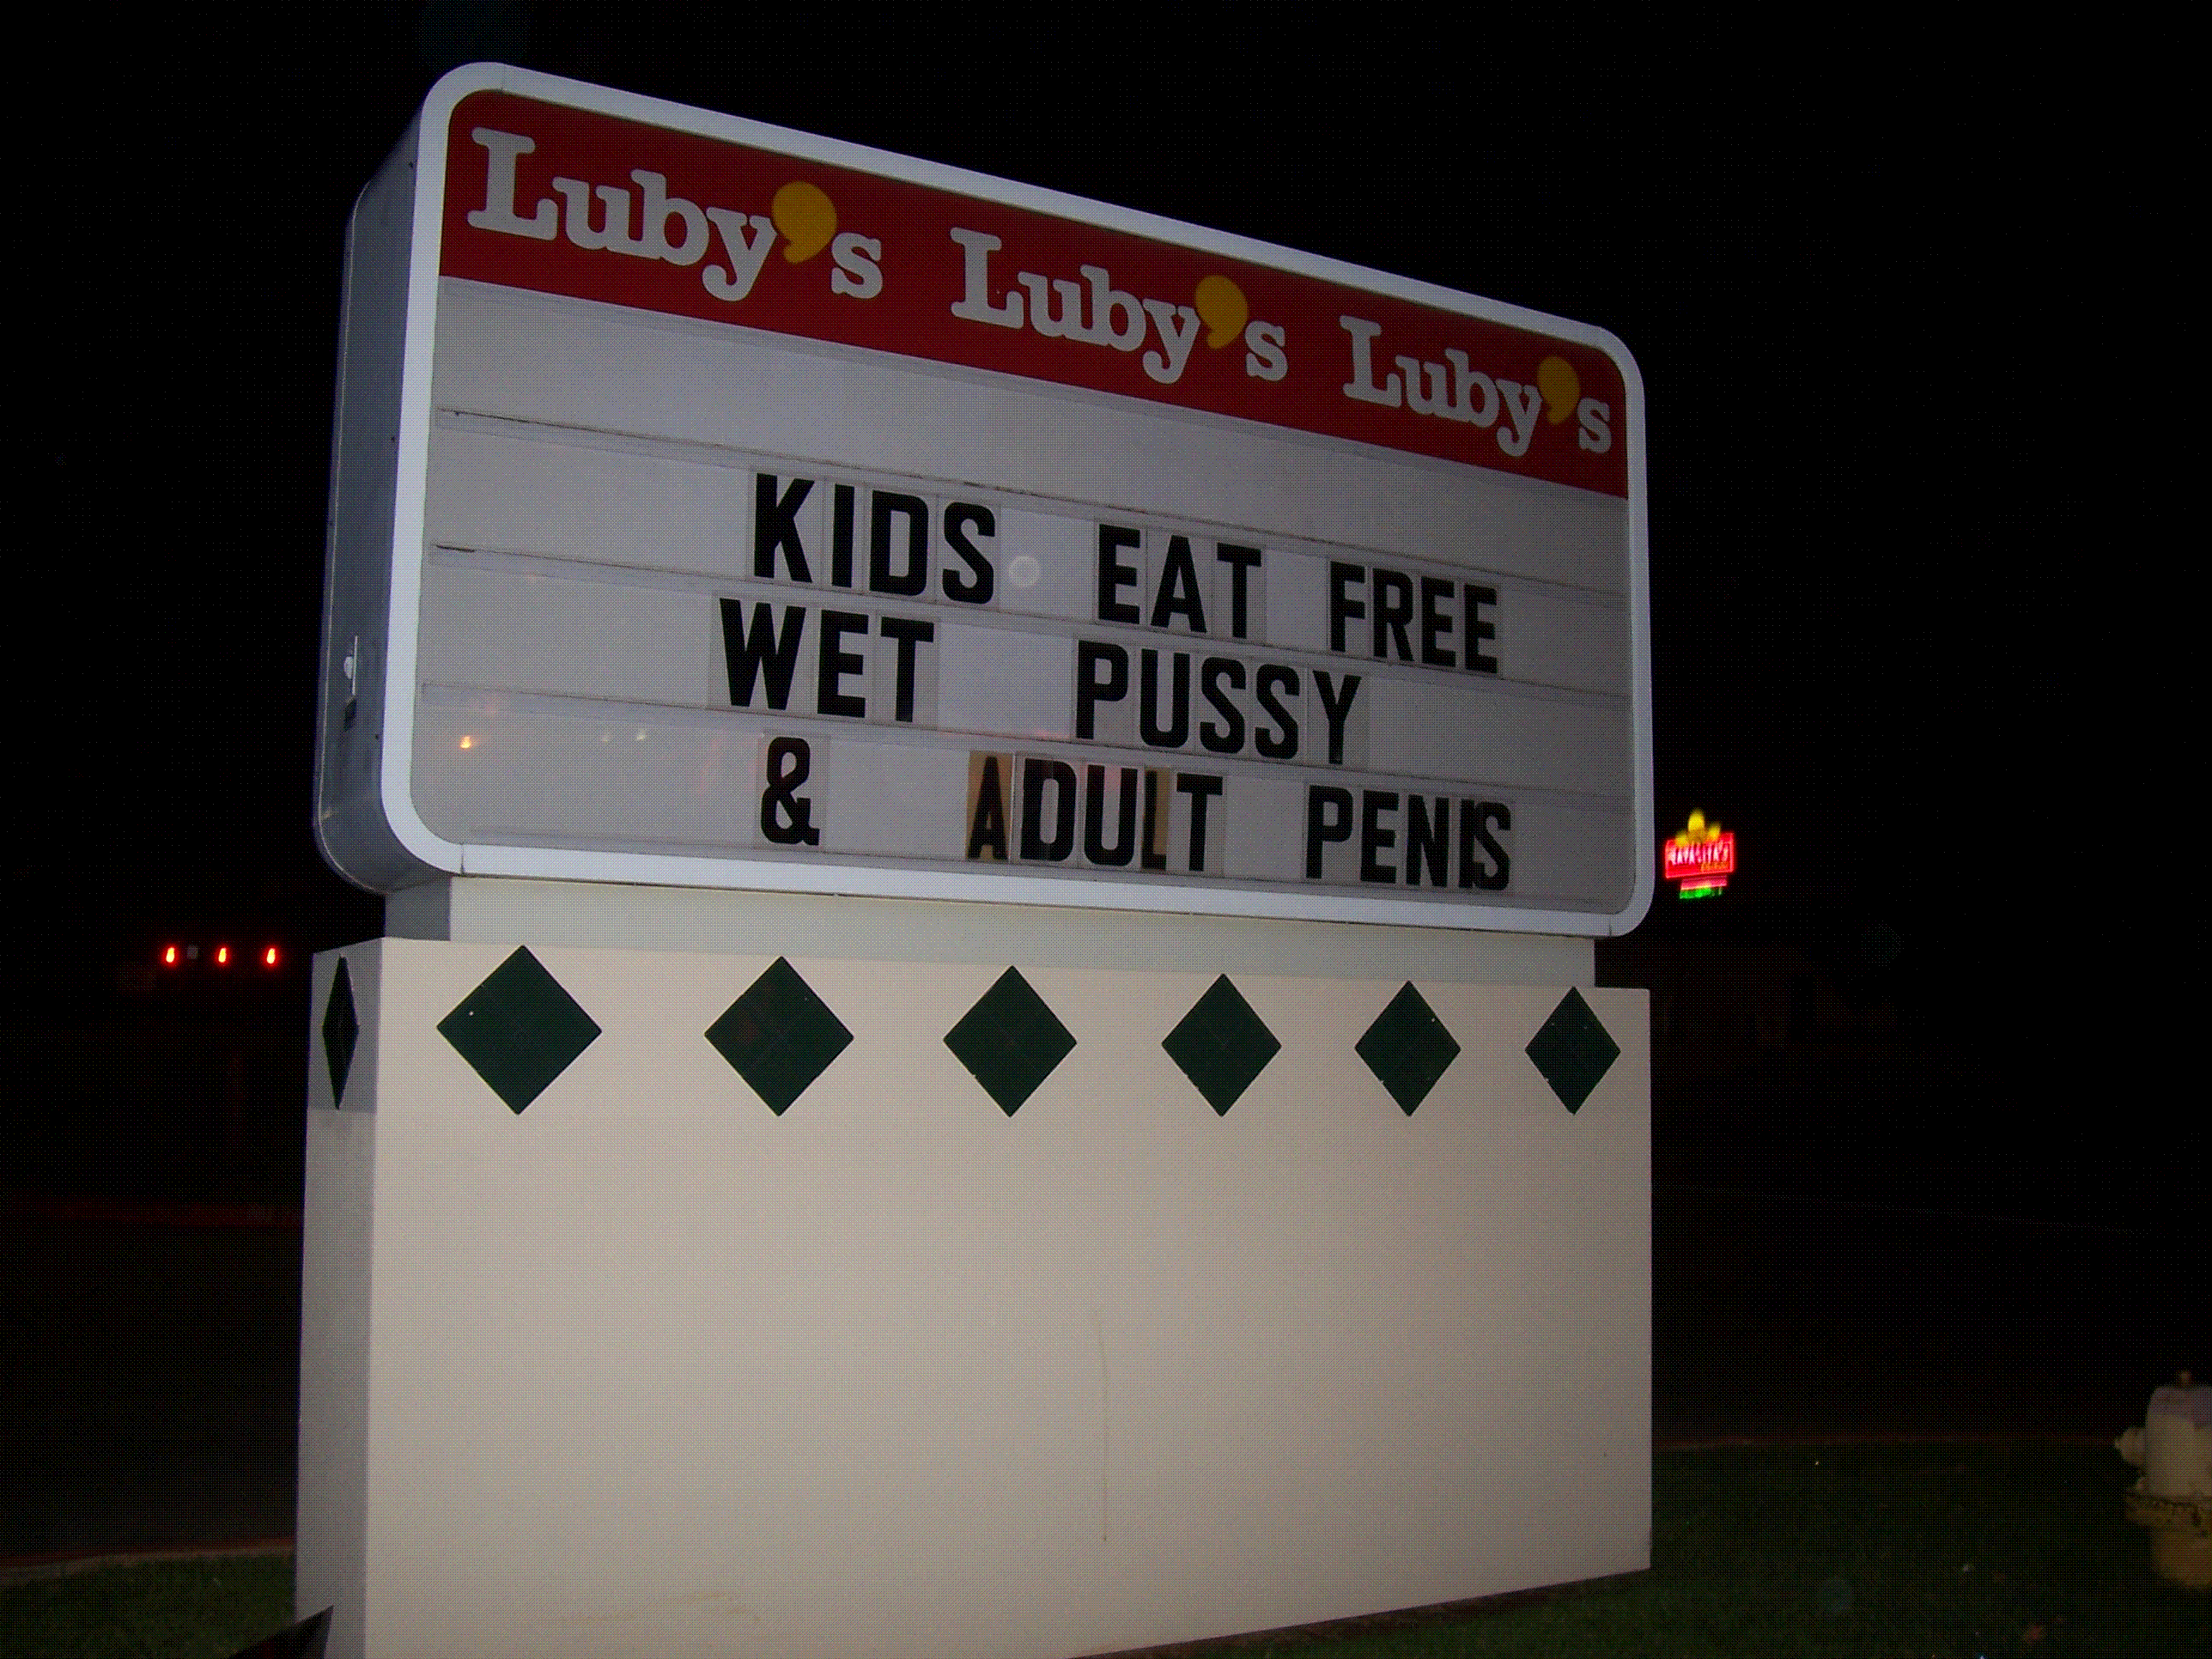 We had fun fixing a Luby's sign in East Texas last September one night while we were bored